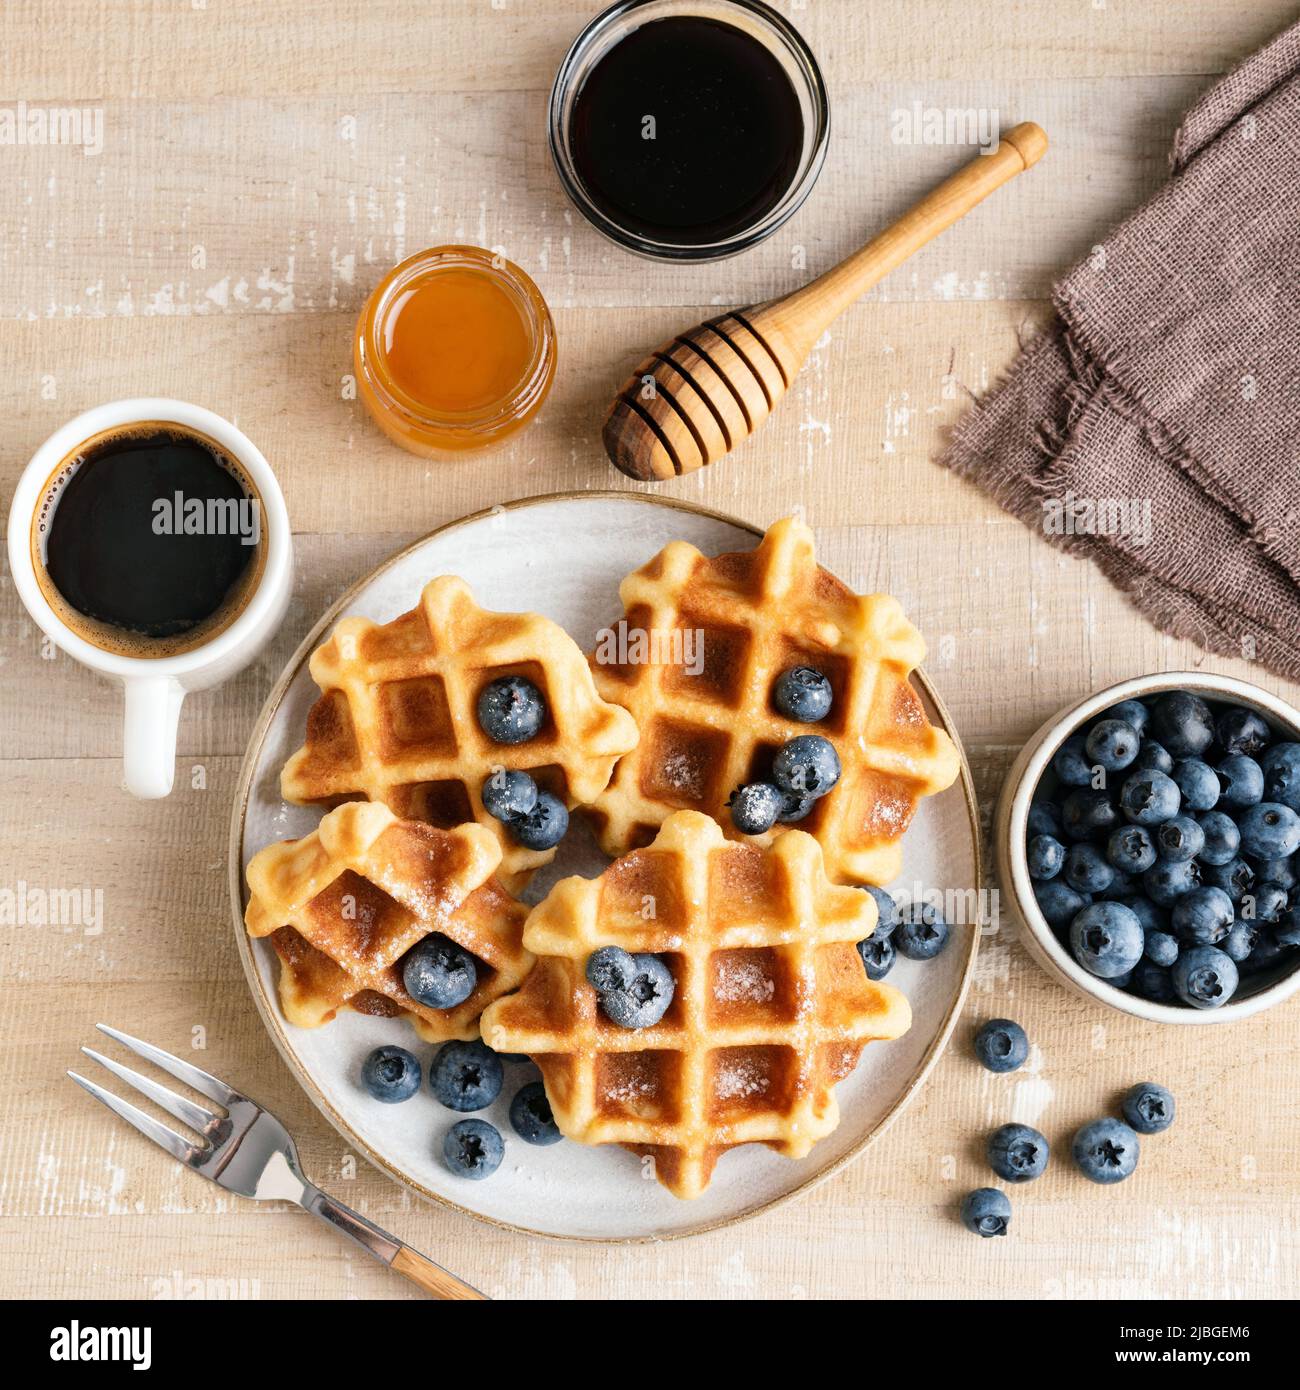 Sweet belgian waffles with blueberries, honey and cup of black coffee on a wooden table, top view. Square crop Stock Photo